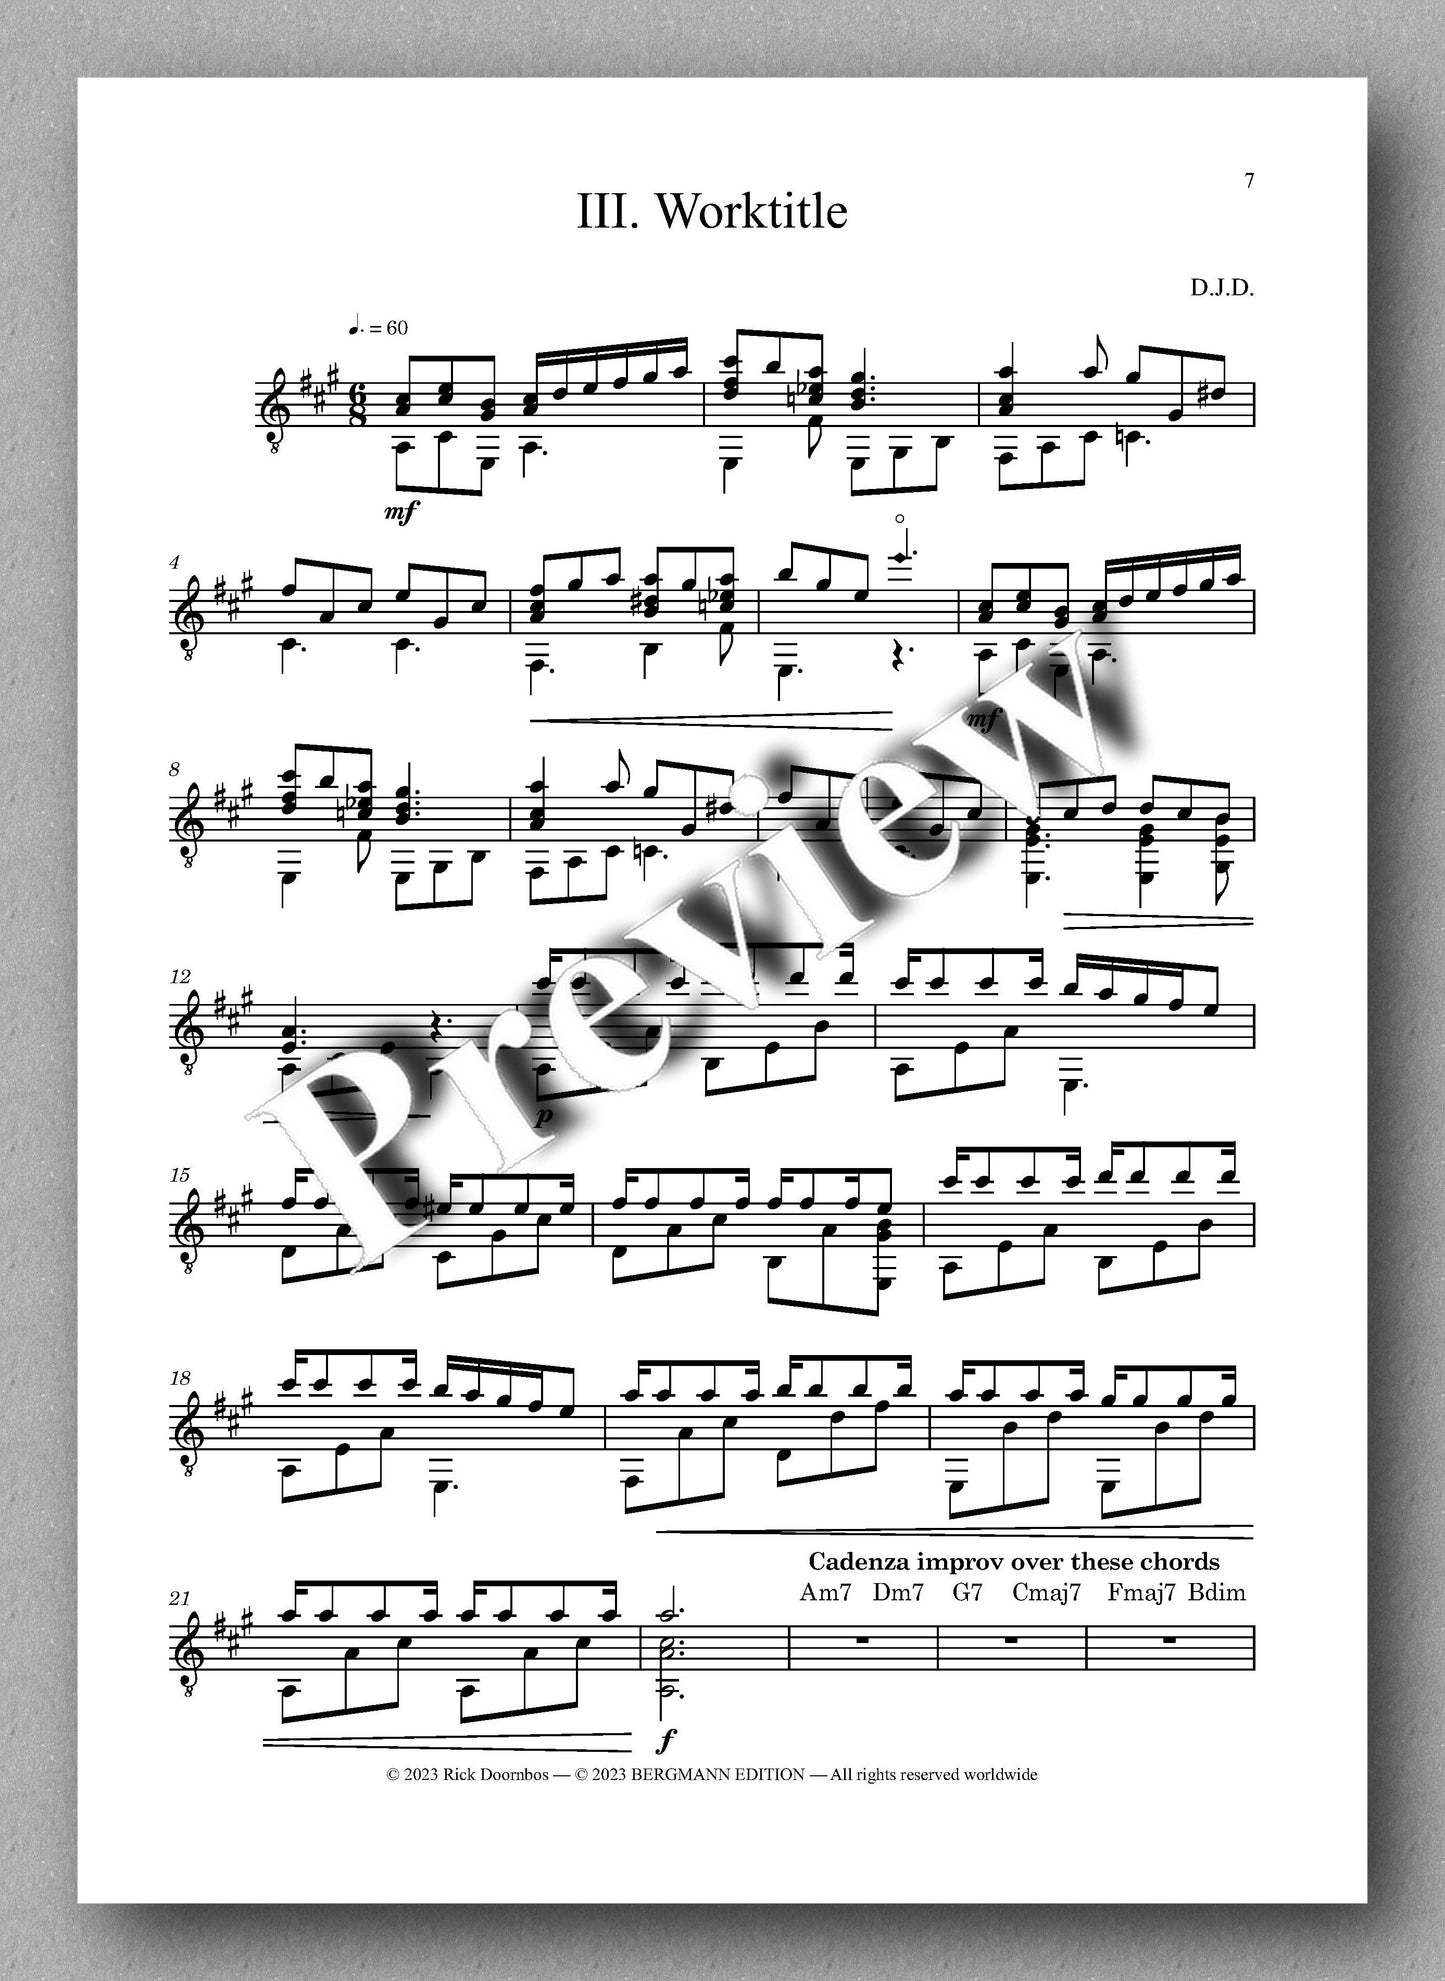 Suite No. 2 by Rick Doornbos - preview of the music score 3